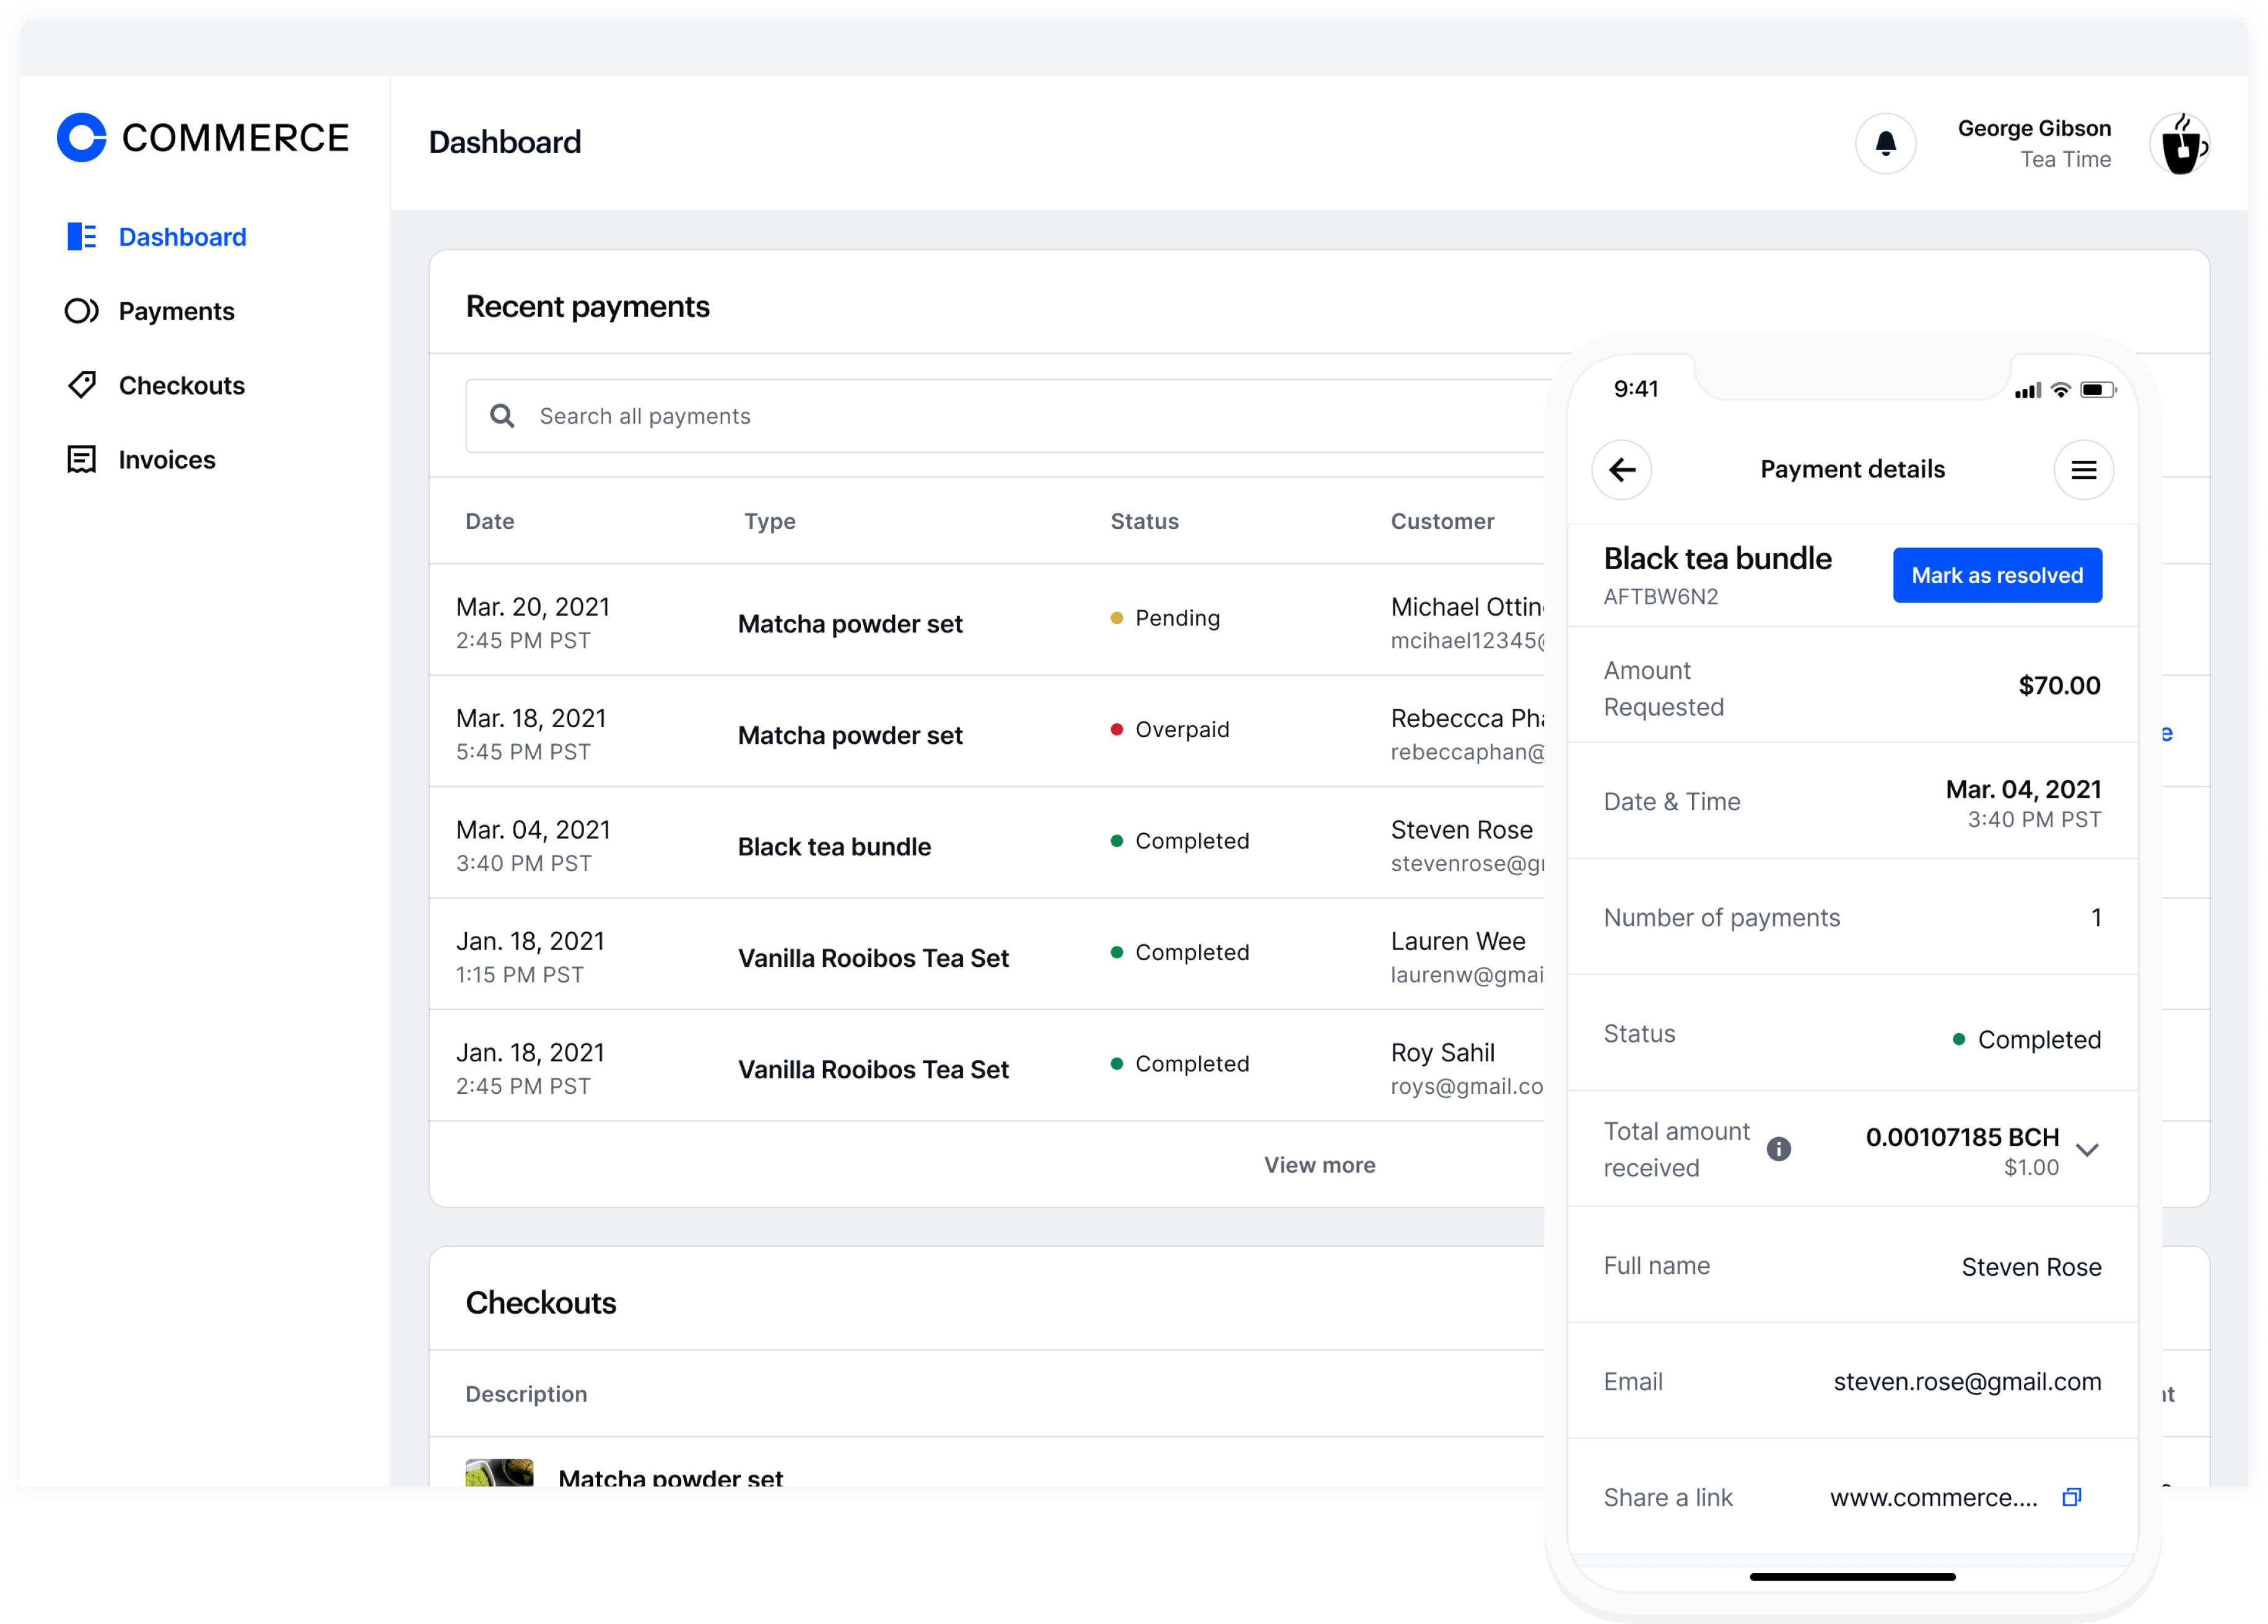 The dashboard of the Coinbase Commerce app